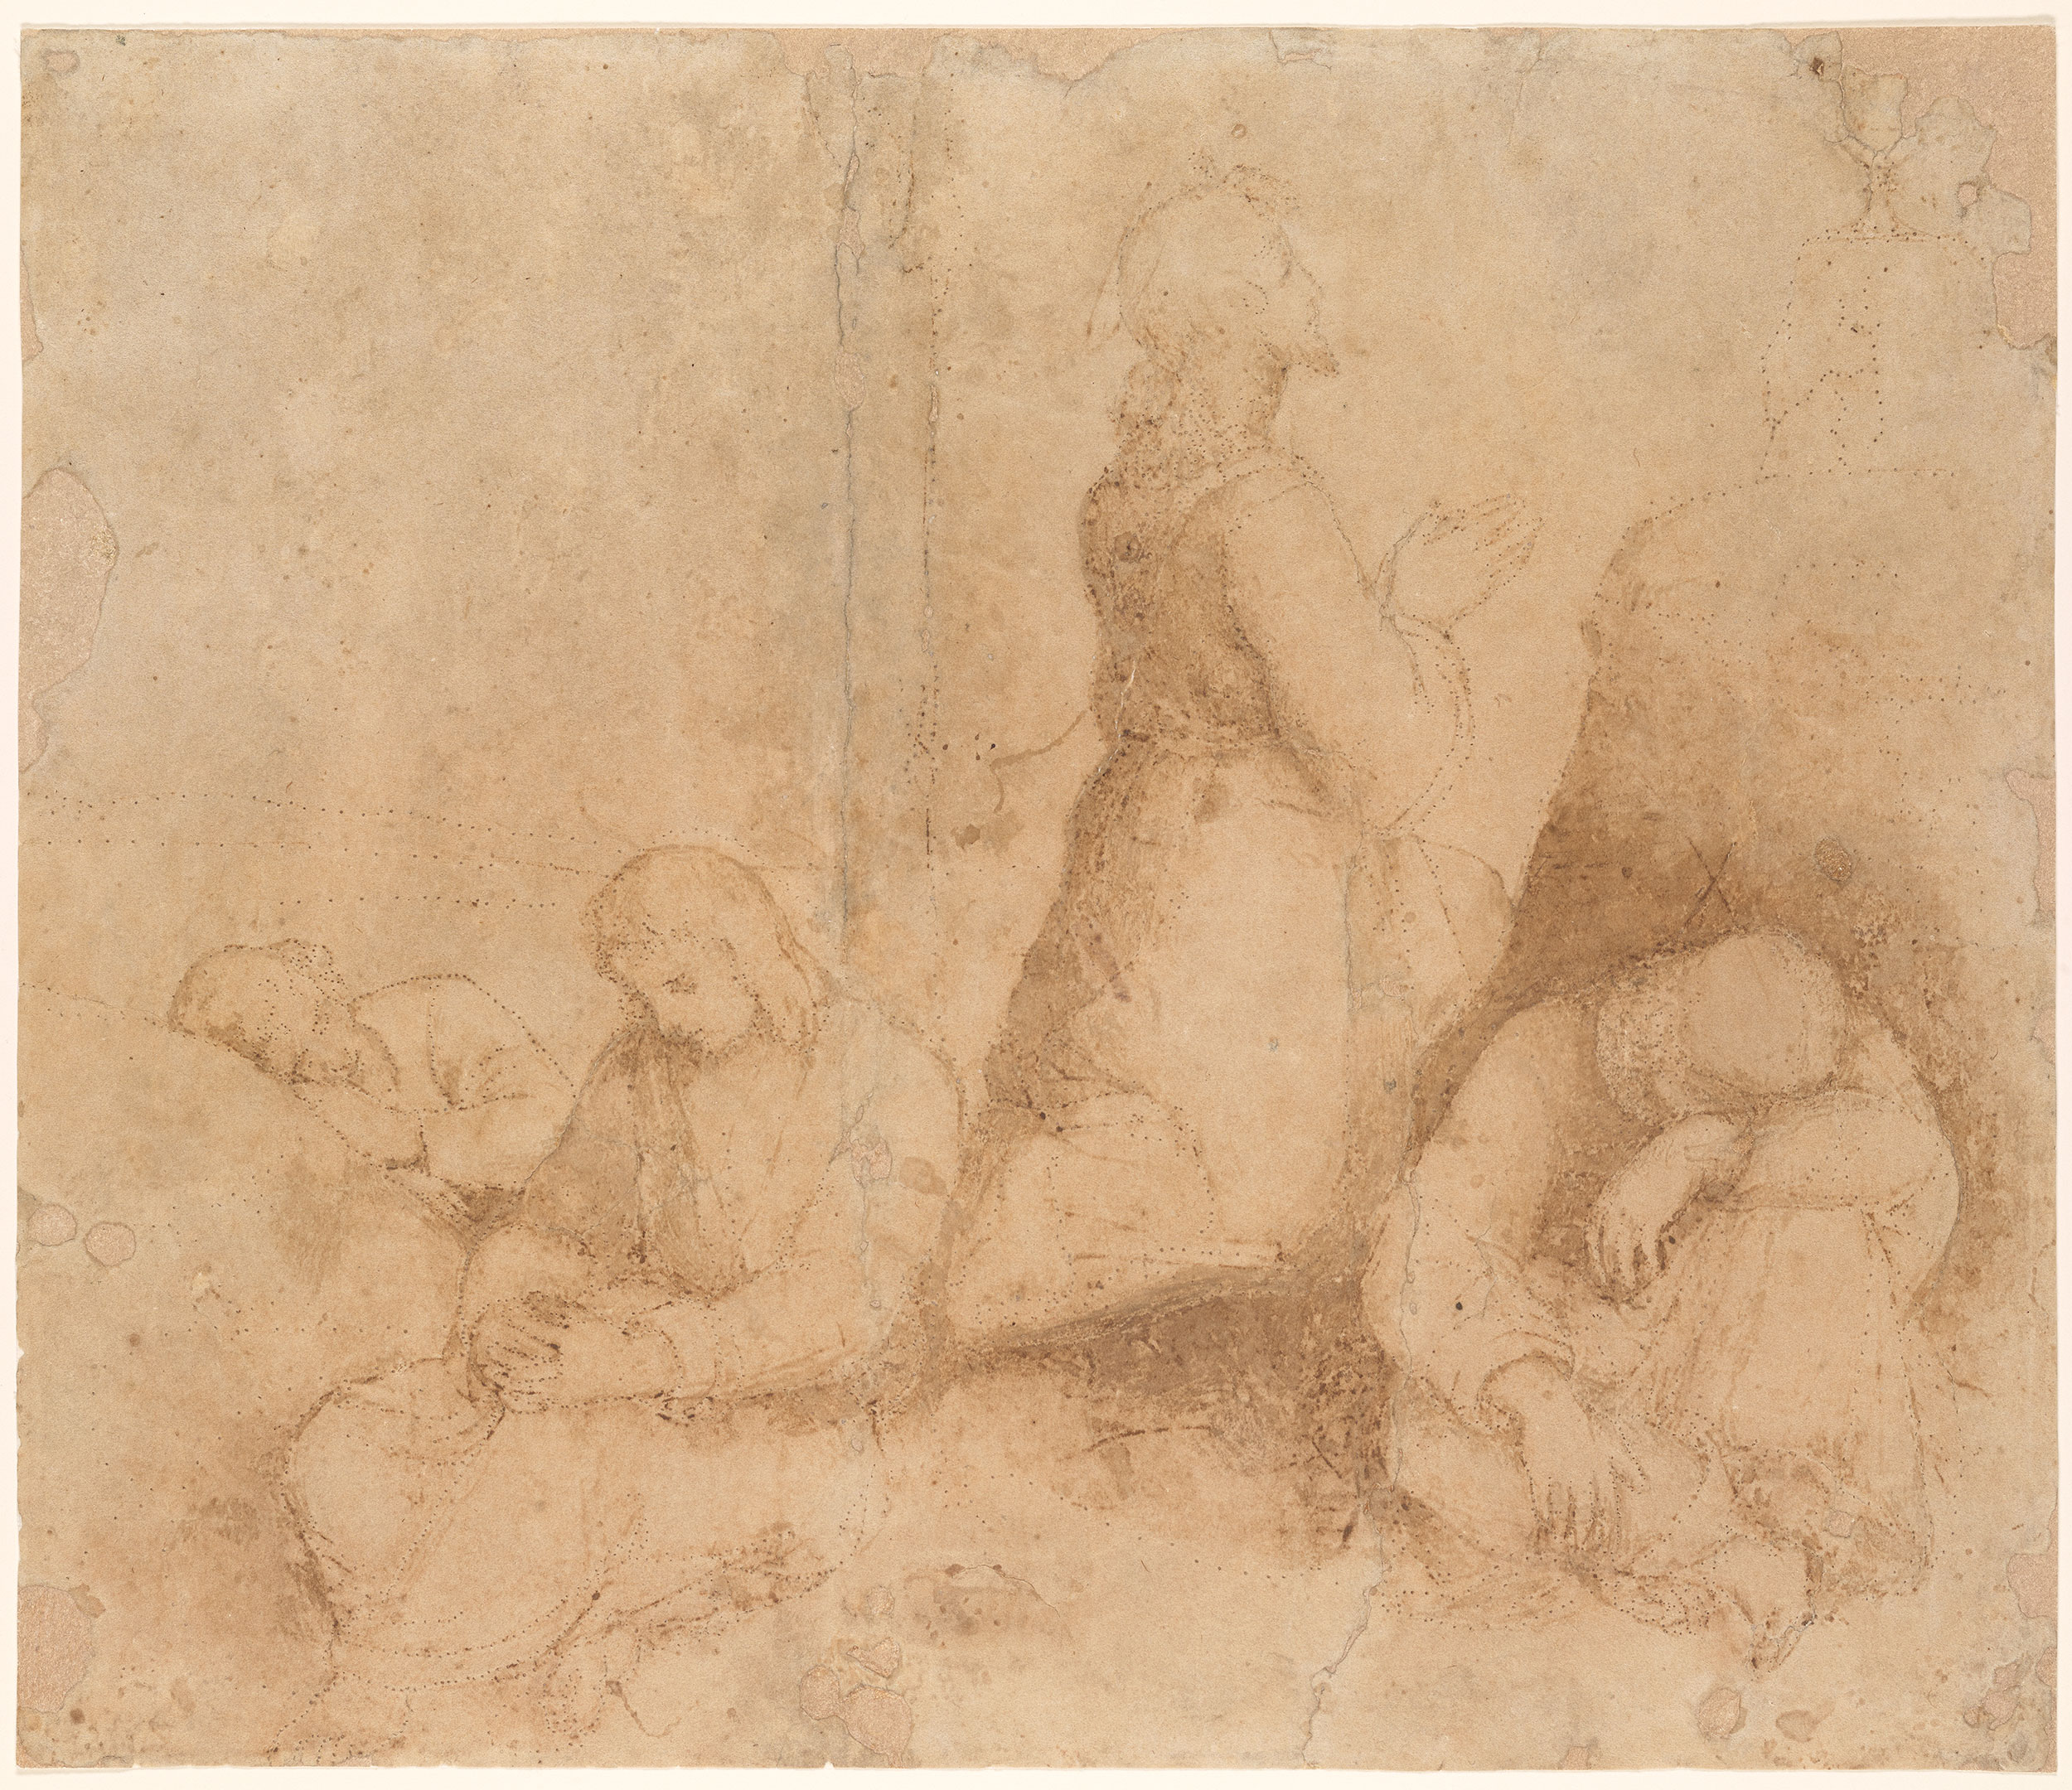 Raphael: The Drawings  Gardens, Libraries & Museums